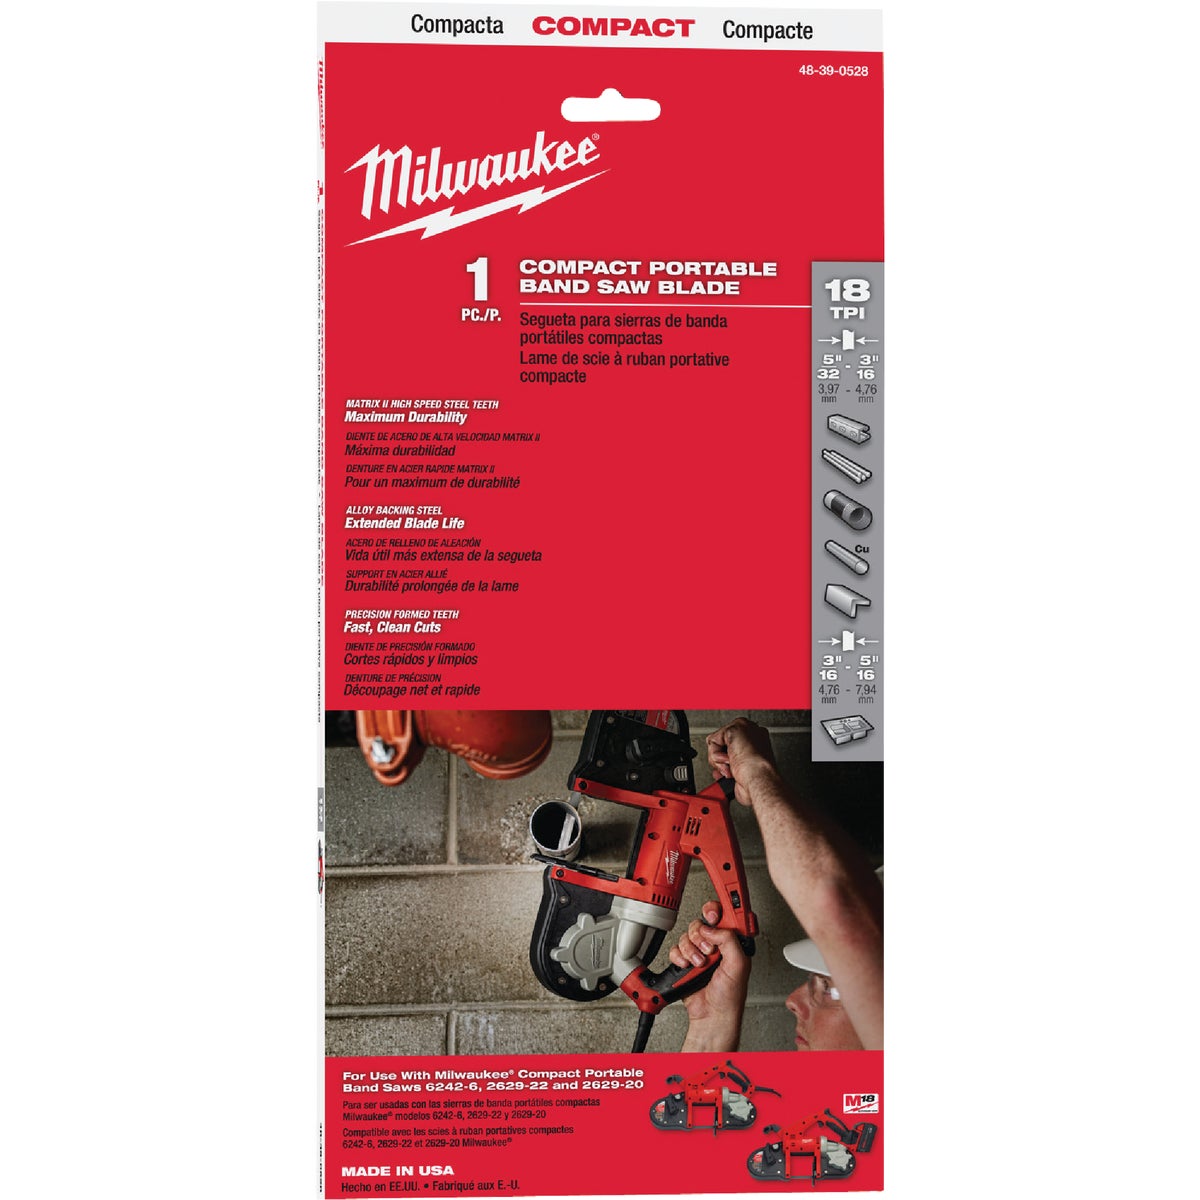 Milwaukee 35-3/8 In. x 1/2 In. 18 TPI Compact Band Saw Blade